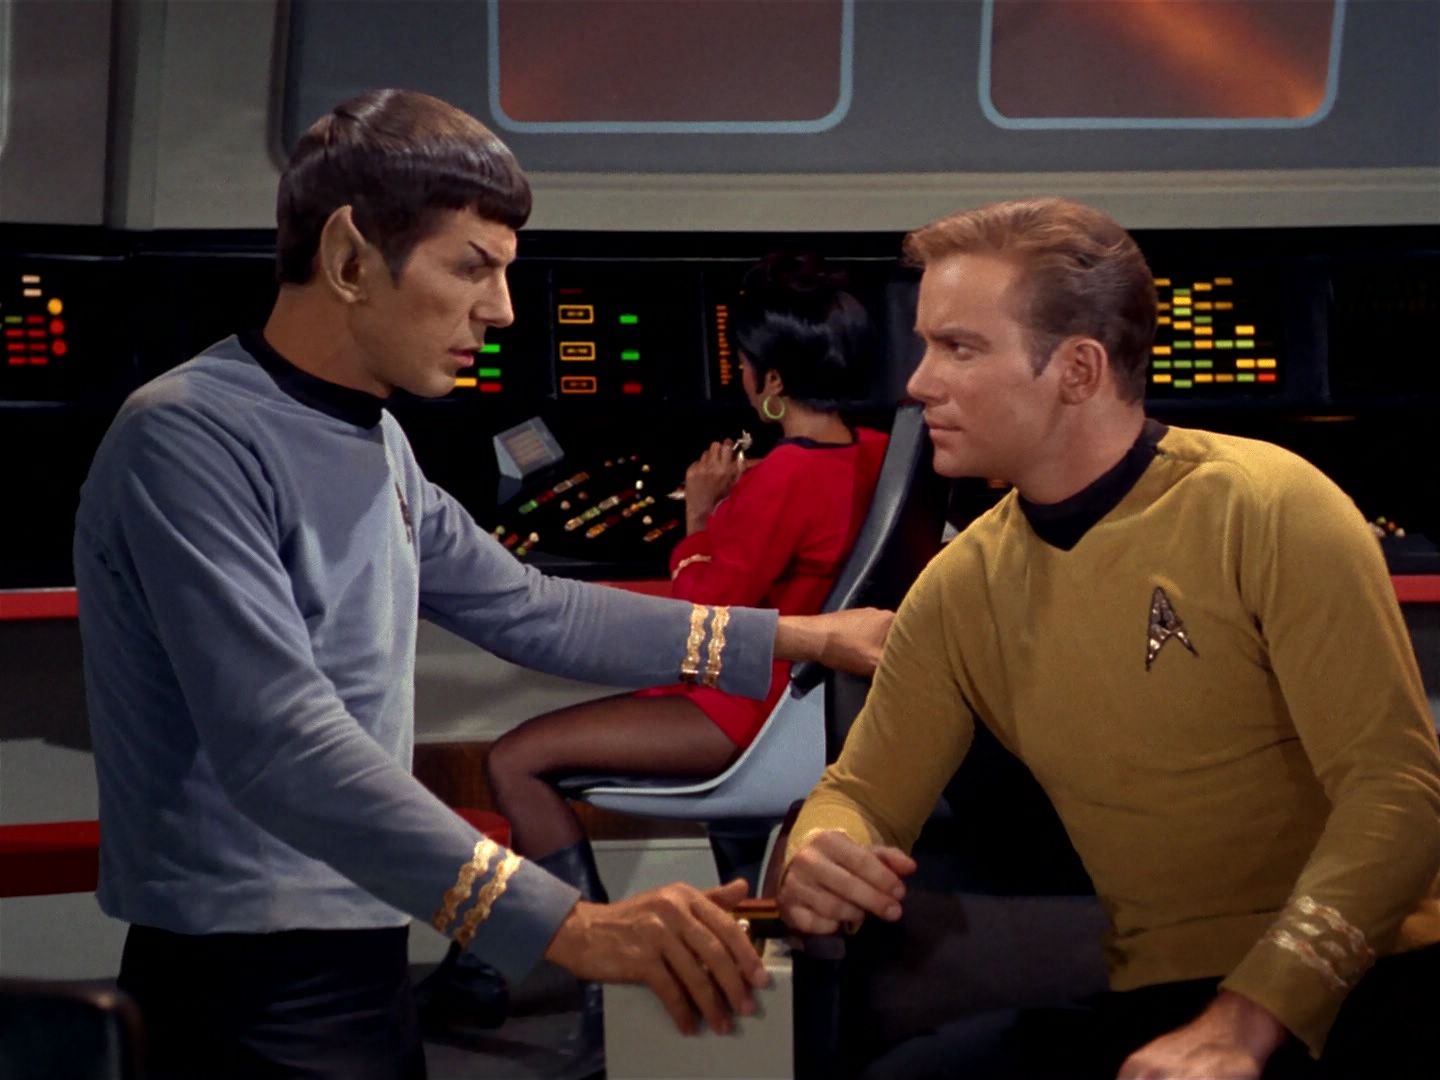 Star Trek Is Awesome: The Naked Time: TOS Season 1 Episode 4